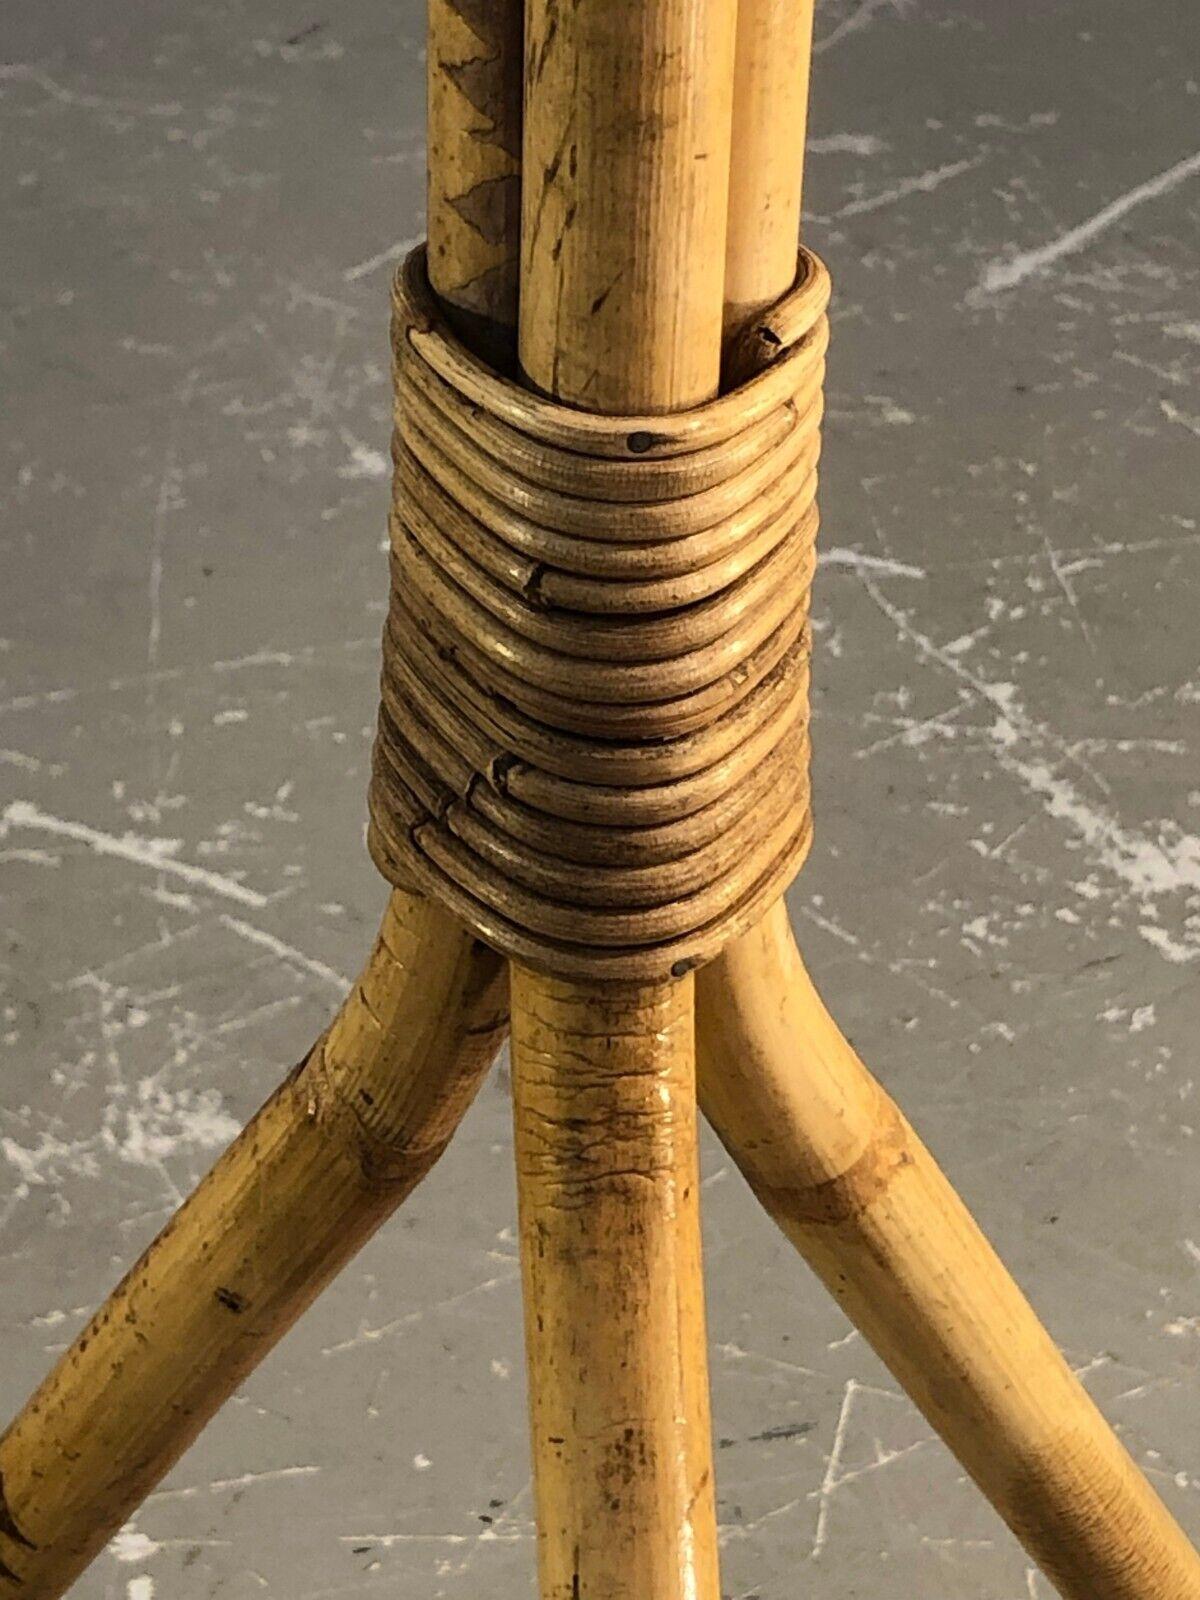 A MODERNIST TRIPOD Bamboo FLOOR LAMP, AUDOUX-MINNET & SOGNOT Style, France 1950 For Sale 2